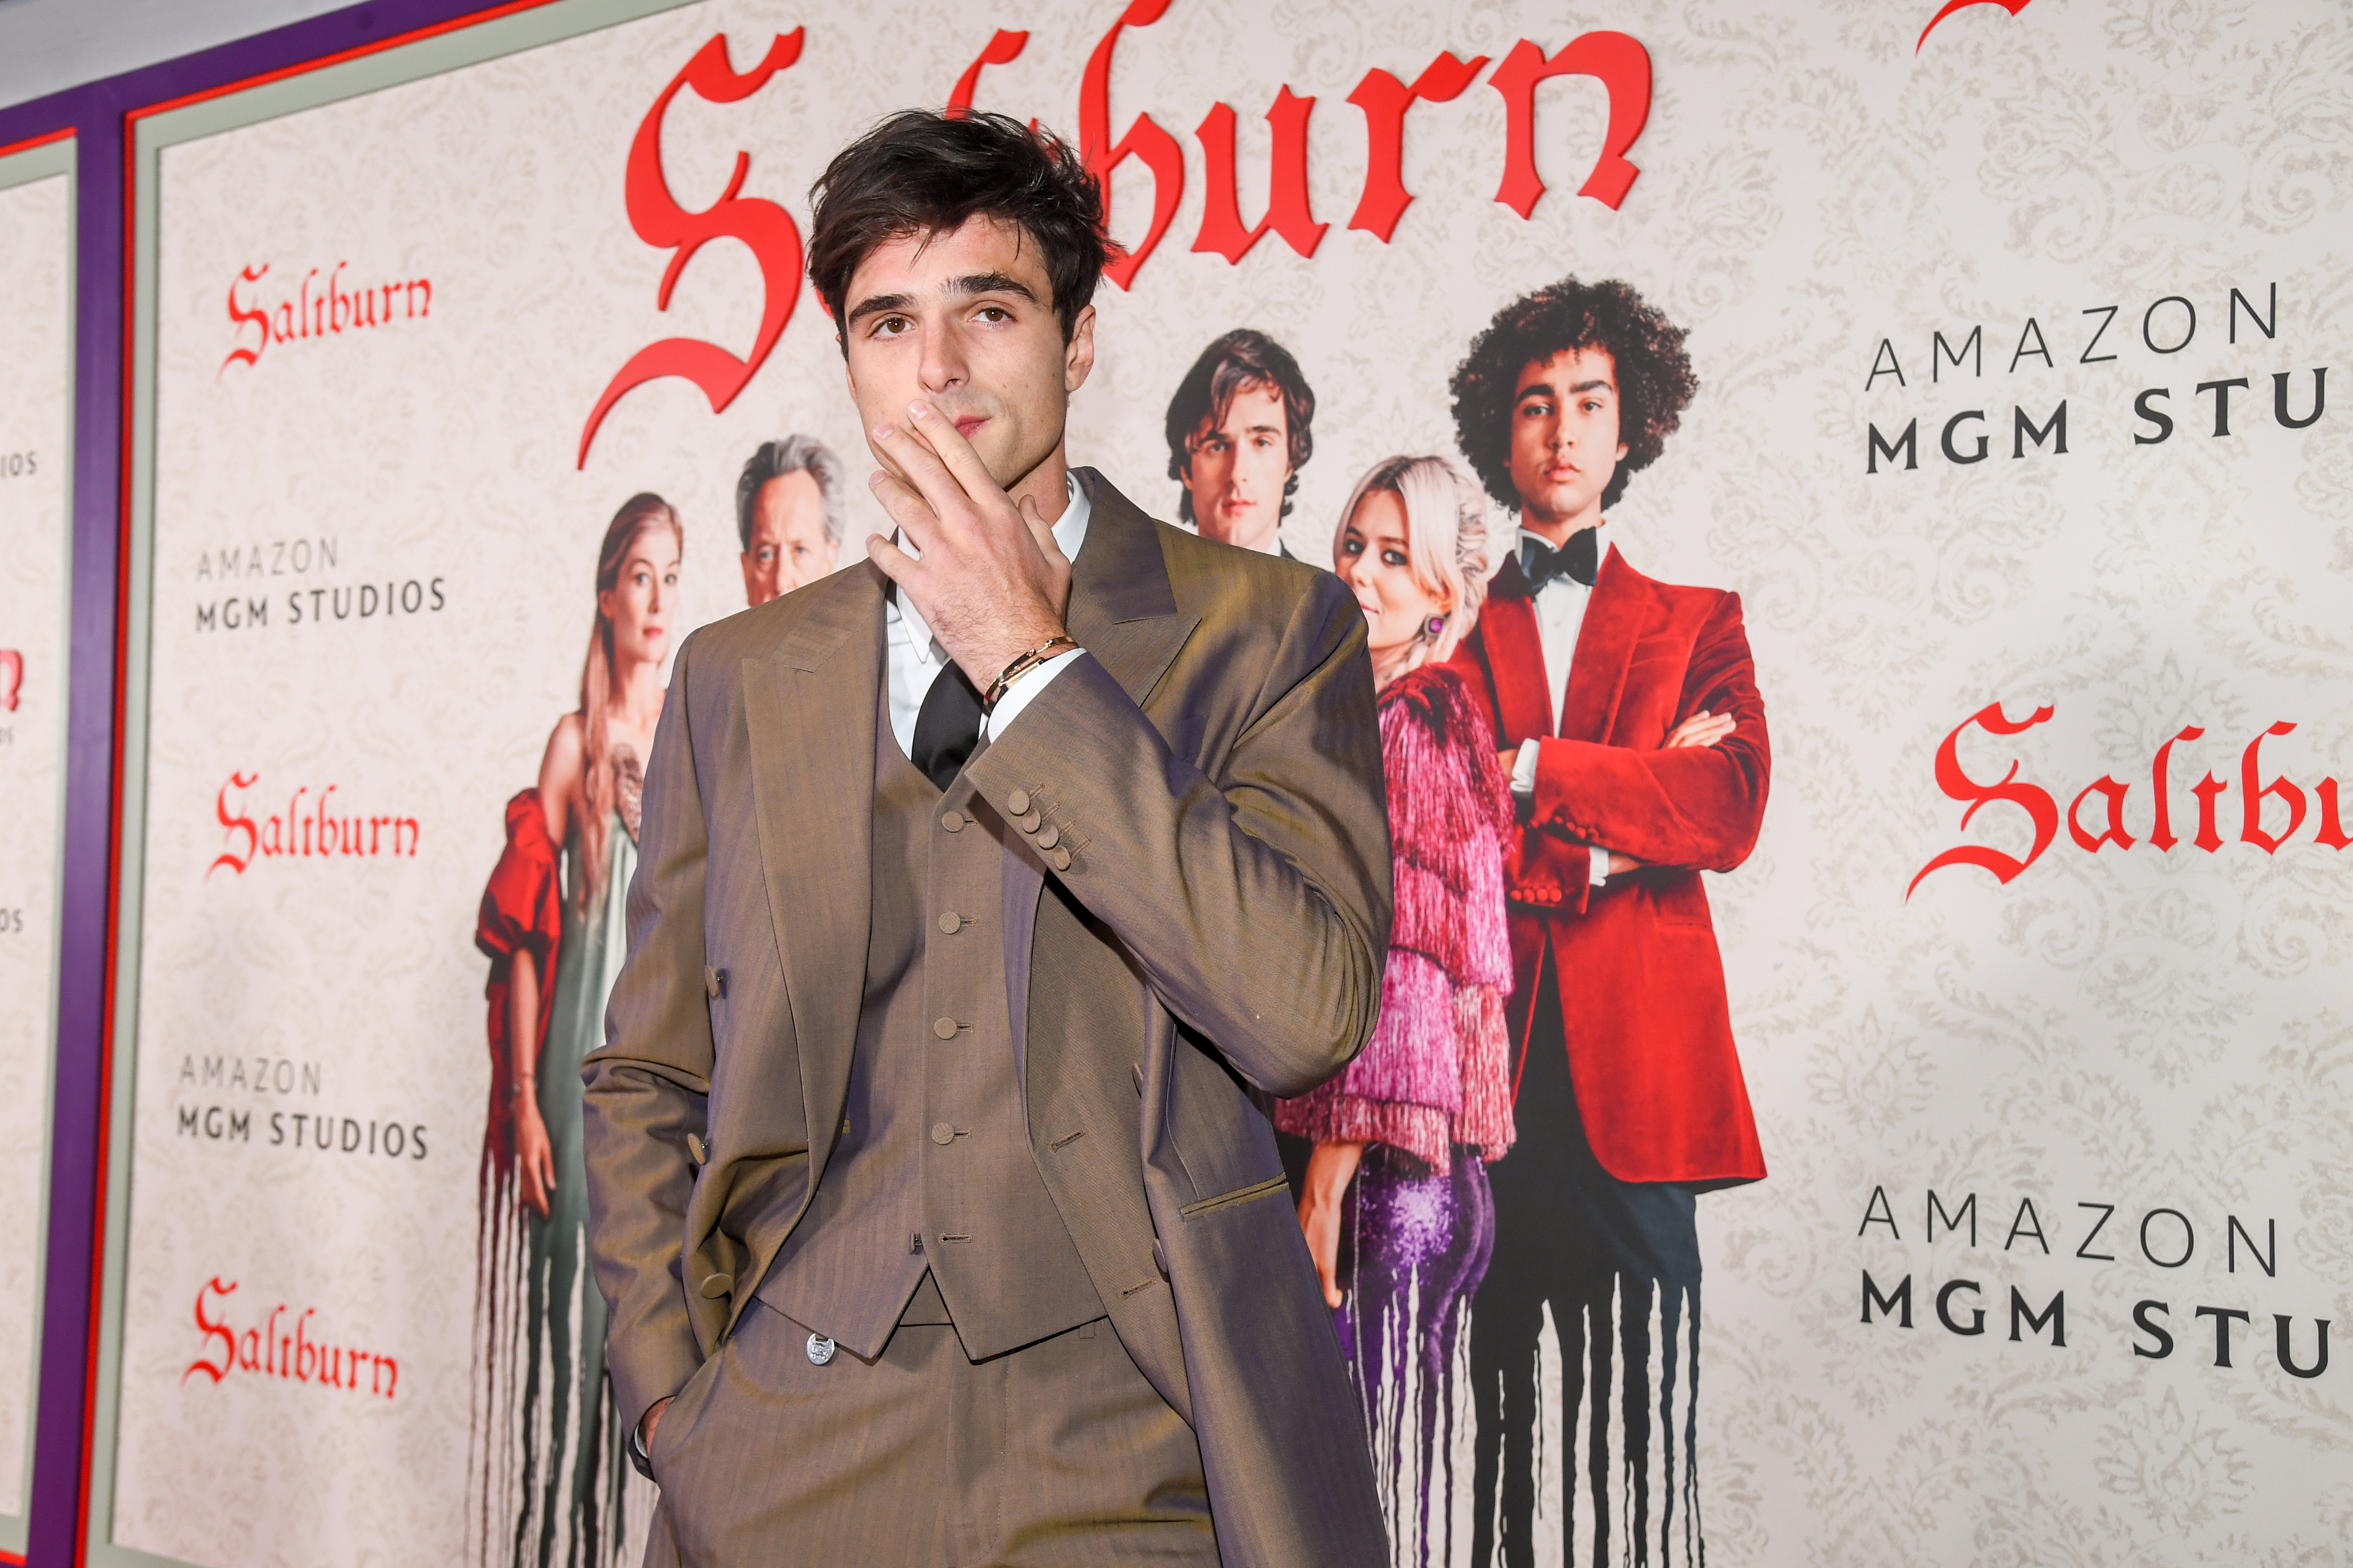 Jacob Elordi in front of the &quot;Saltburn&quot; promotional poster